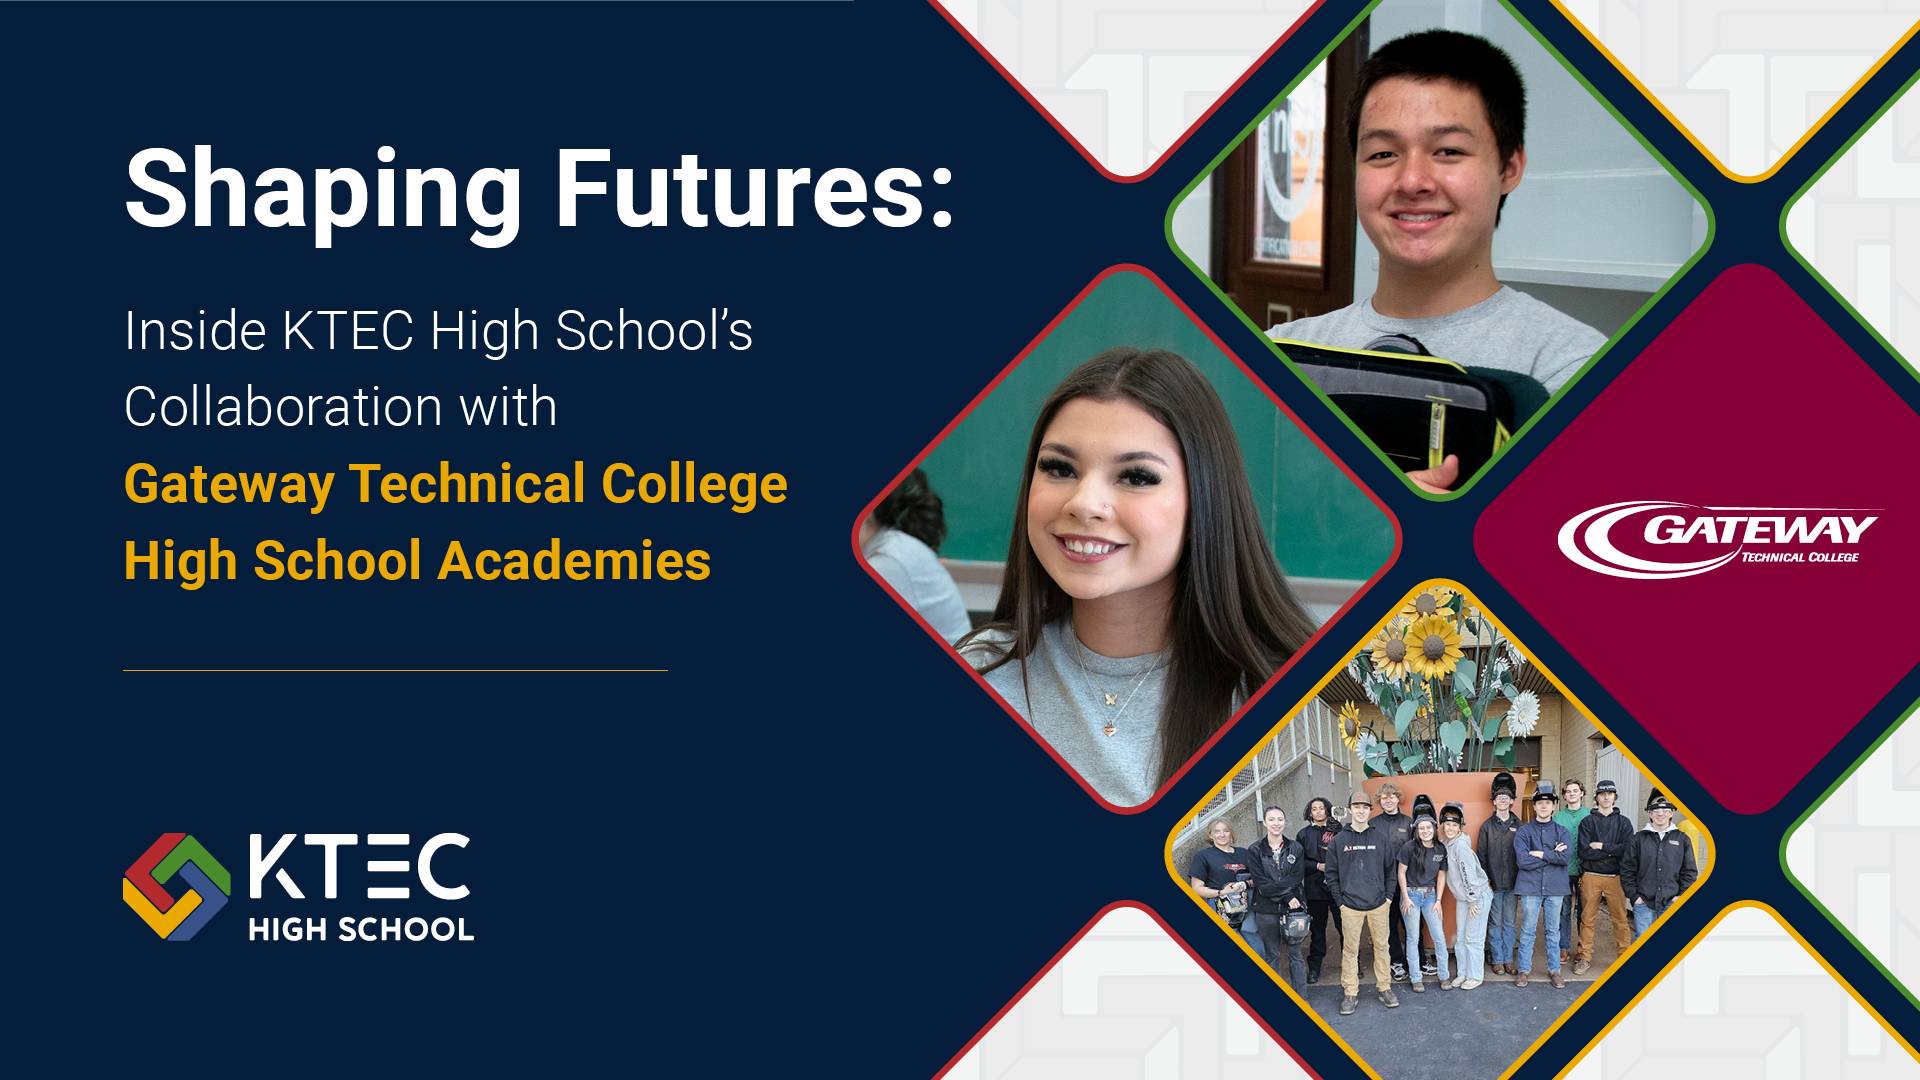 Shaping Futures: Inside KTEC High School’s Collaboration with Gateway Technical College High School Academies